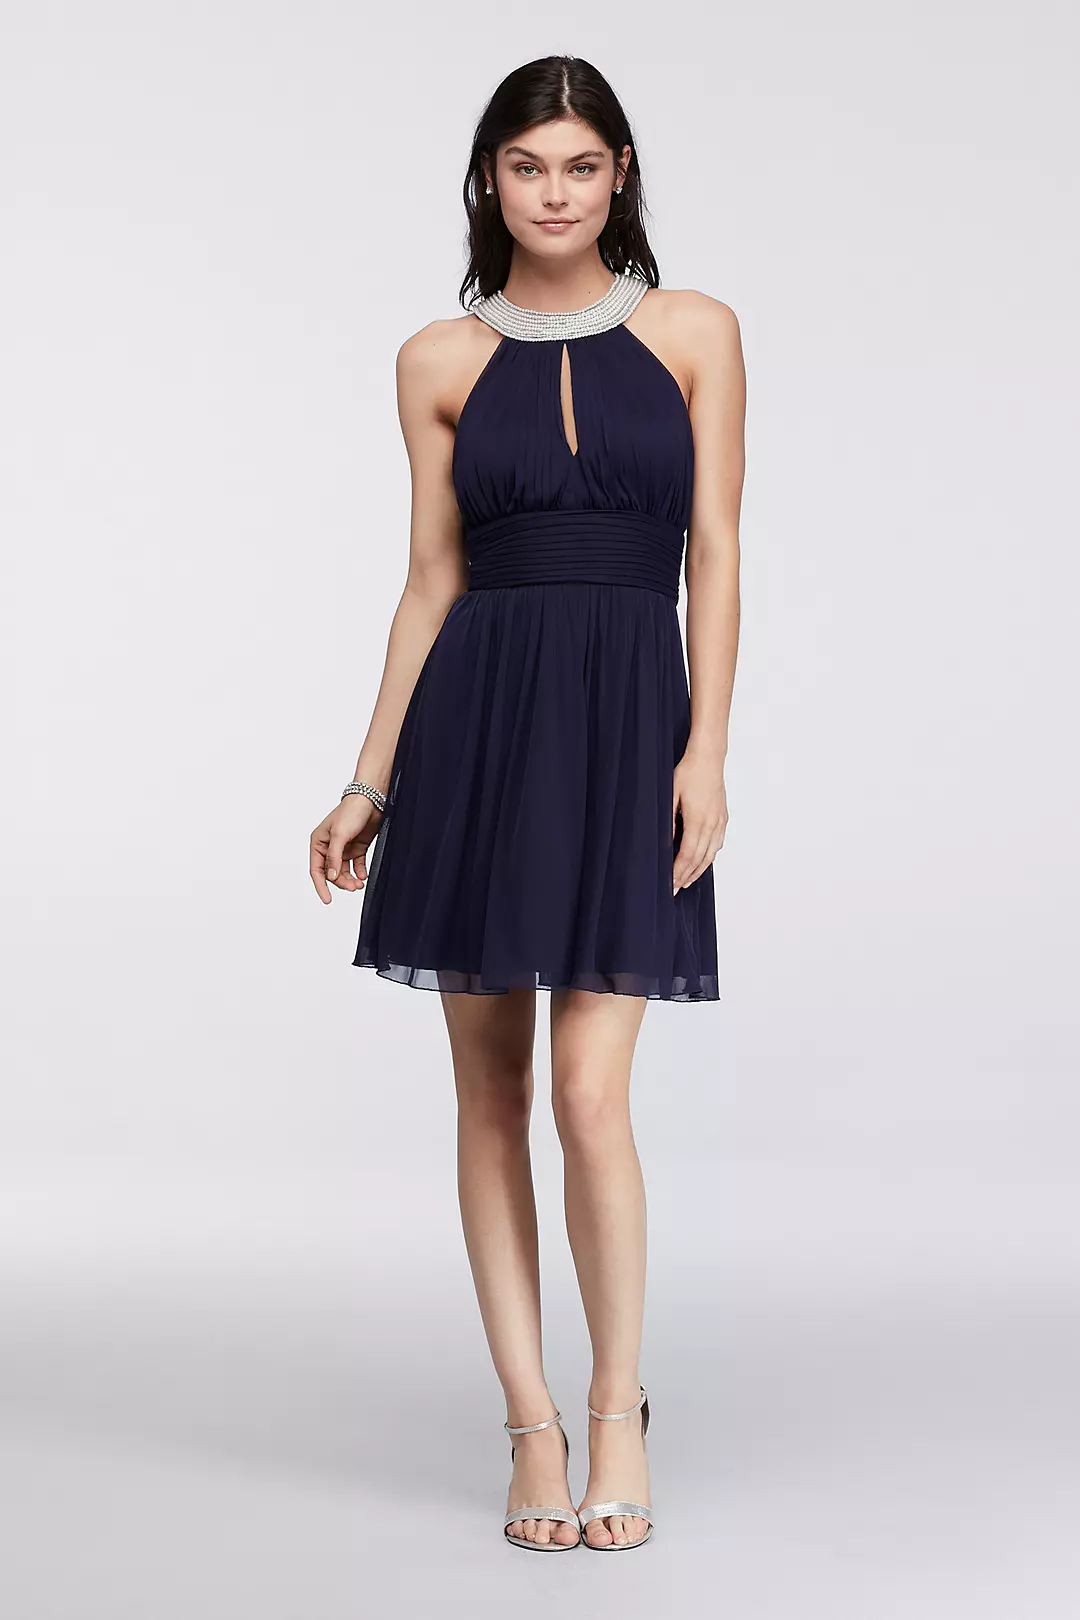 Short Dress with Pearl Keyhole Neckline Image